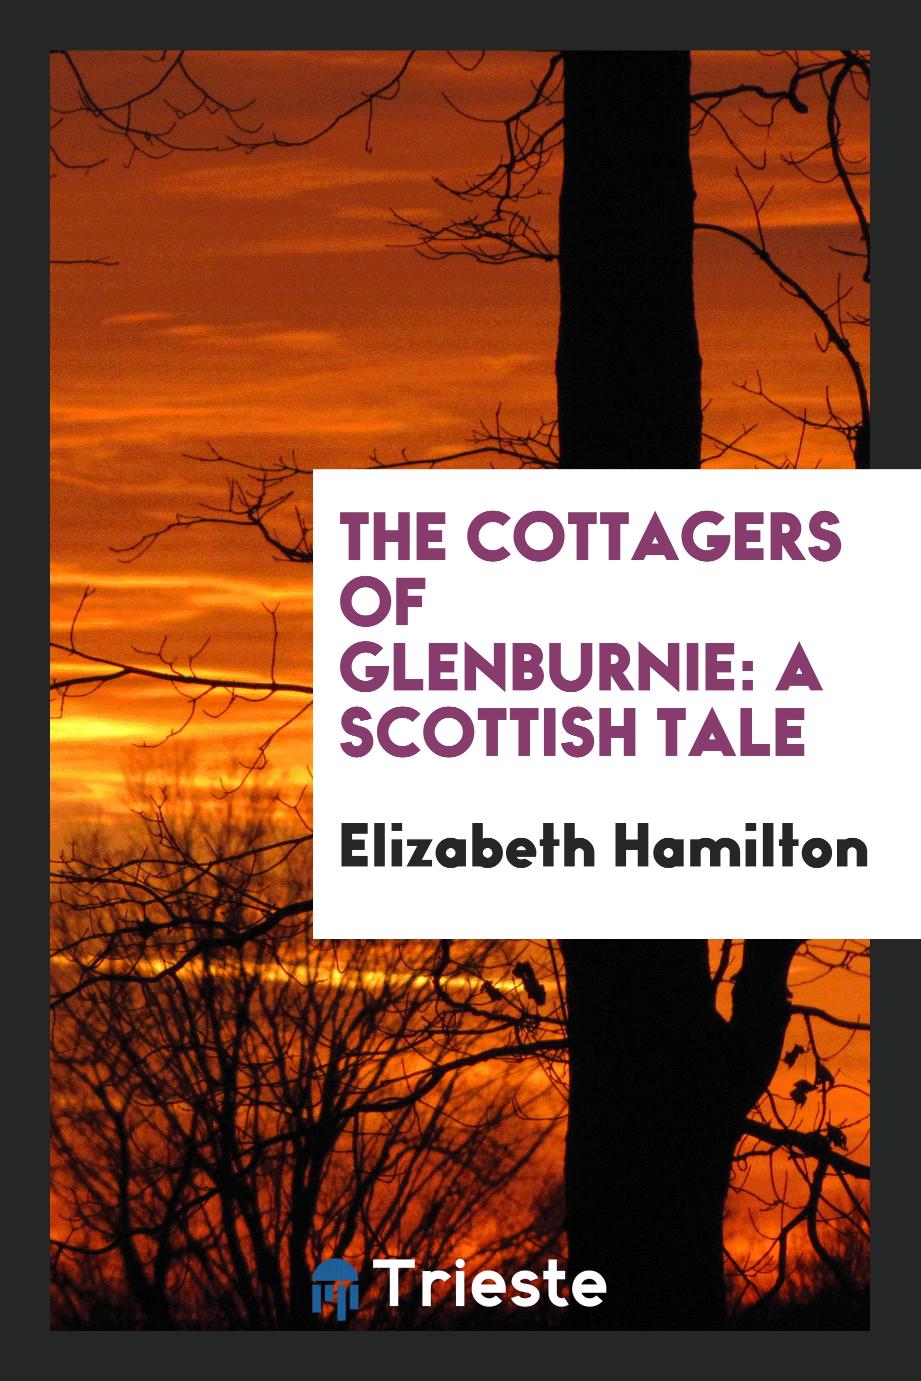 The cottagers of Glenburnie: a Scottish tale